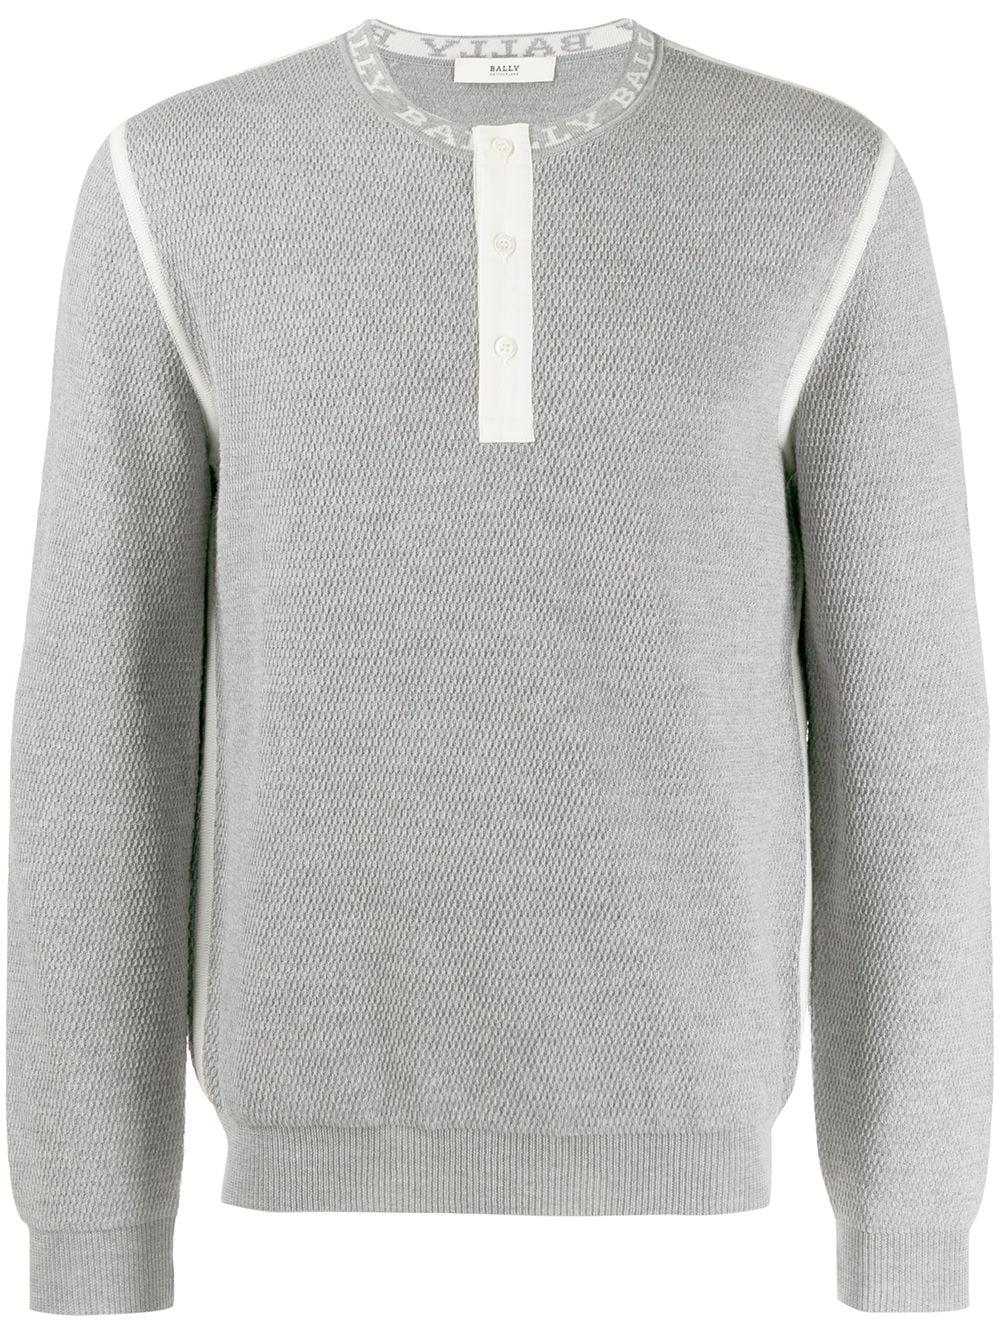 Bally Cotton Textured Knit Sweater in Grey (Gray) for Men - Save 5% - Lyst